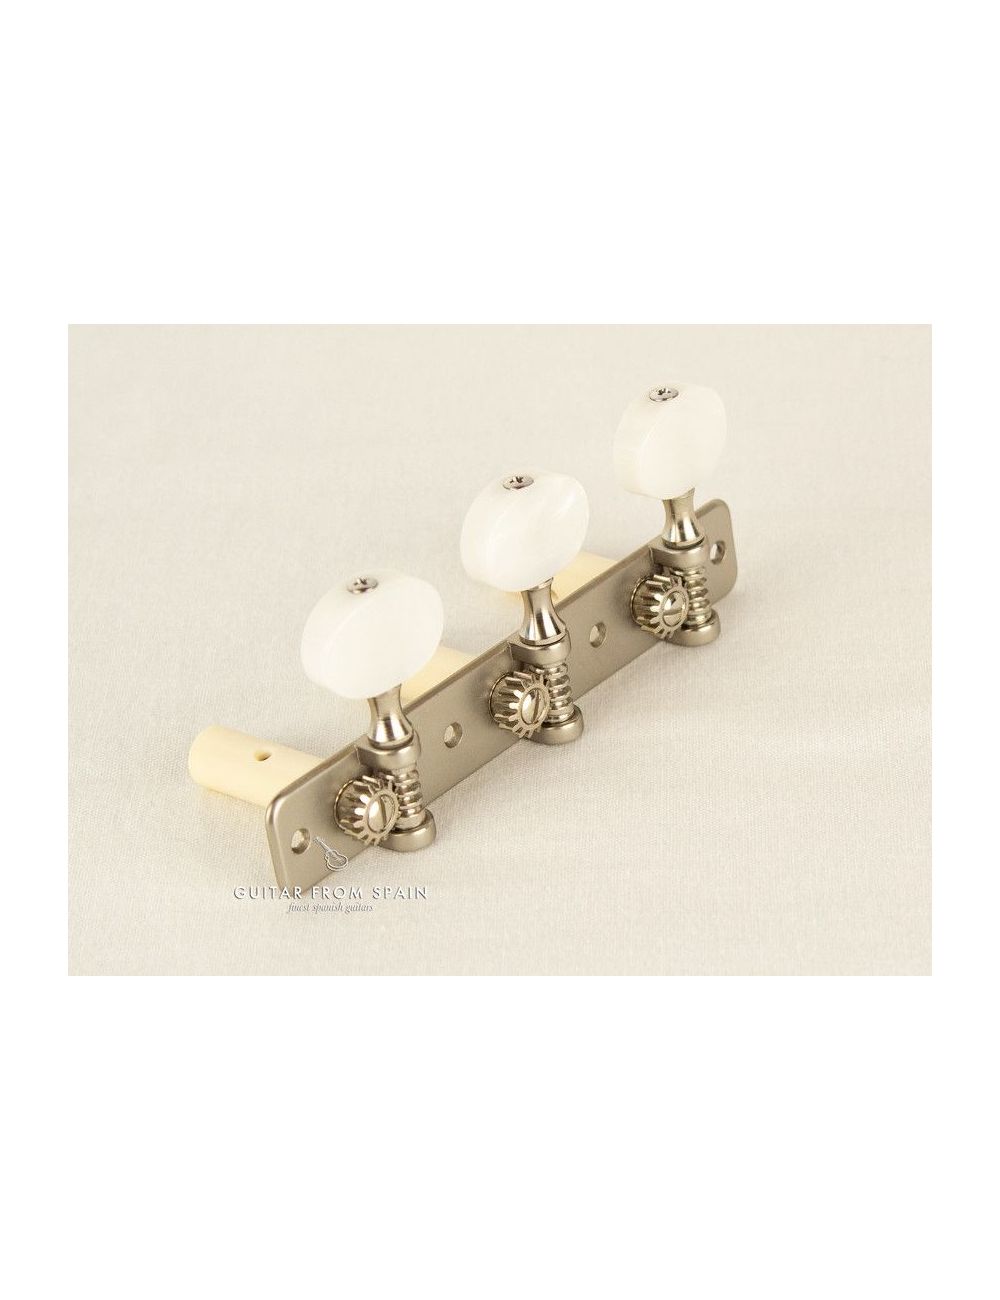 Prudencio Saez MH9 WH - Classical Guitar Tuning Machines MH-9 WH Tuning Machines